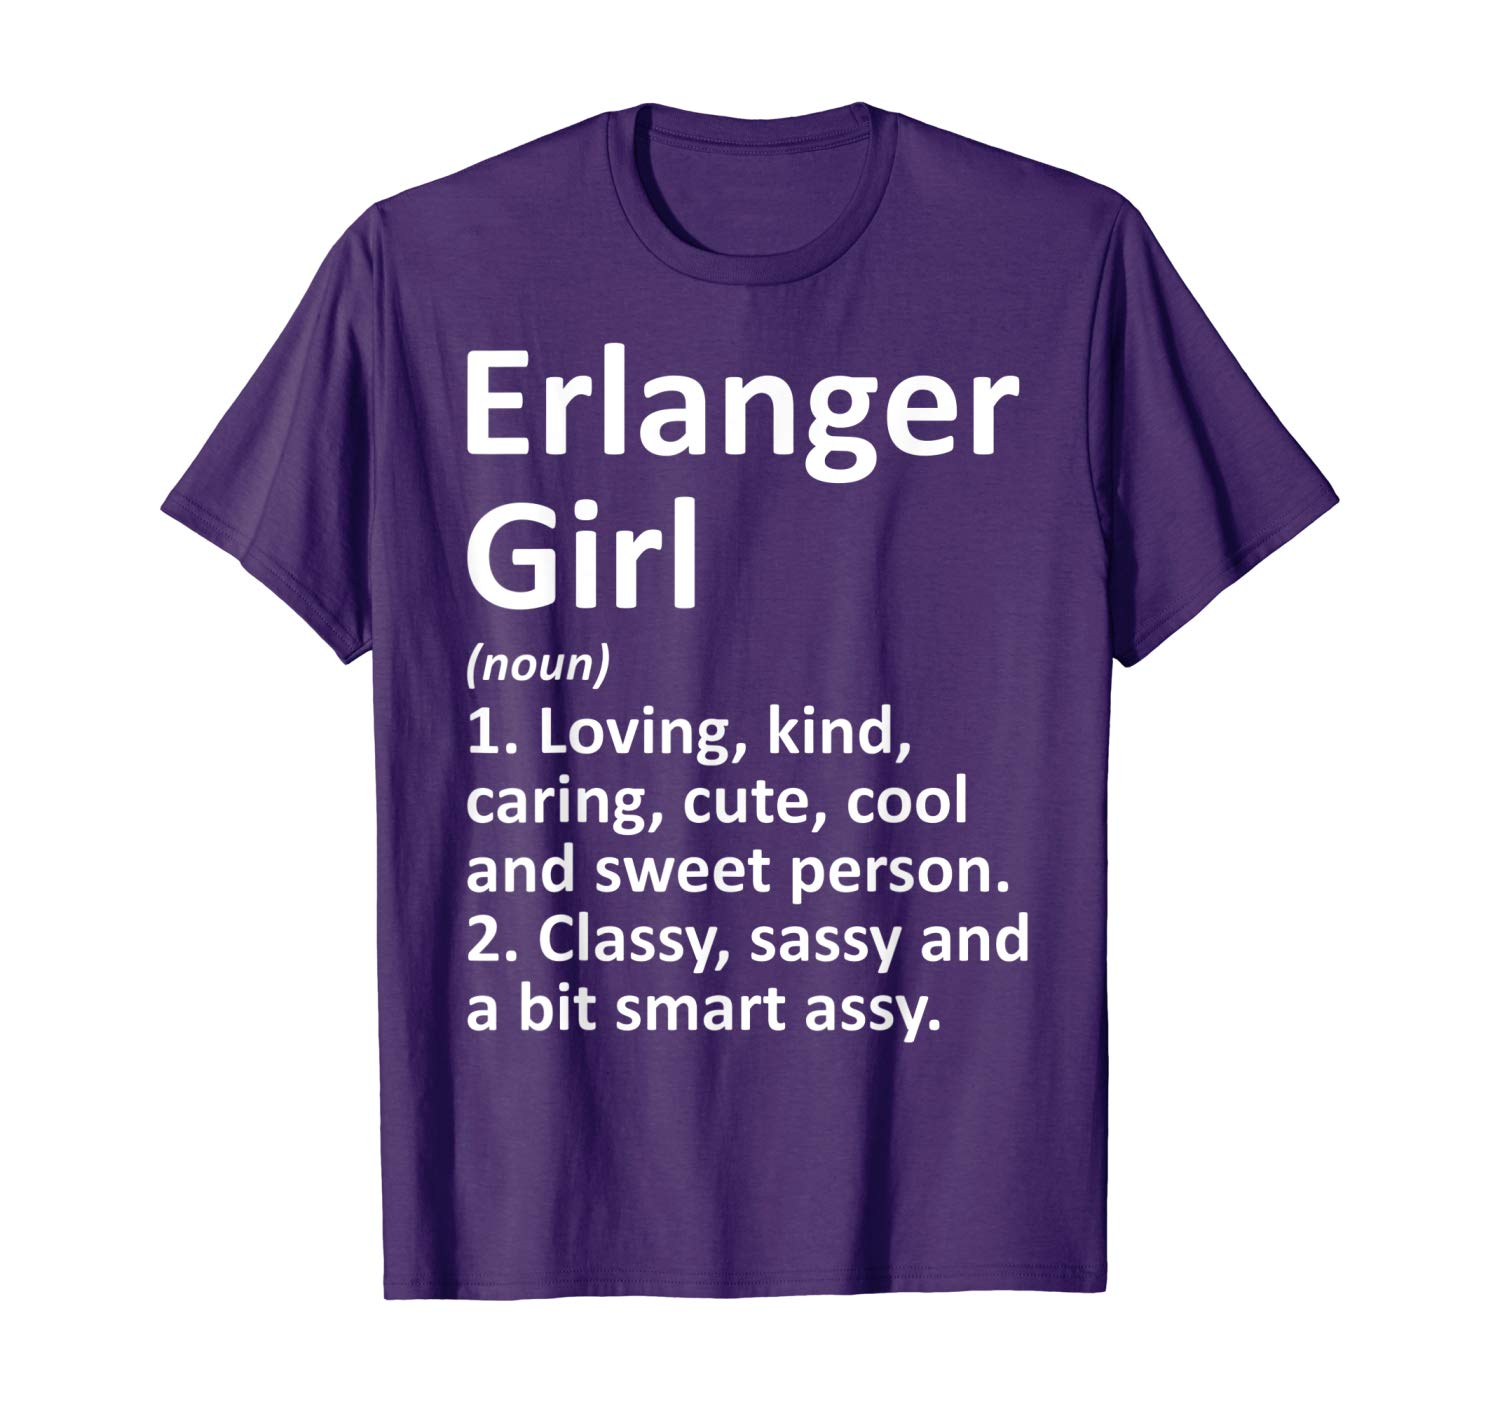 Awesome ERLANGER GIRL KY KENTUCKY Funny City Home Roots Gift T-Shirt T-Shirt Sweatshirt Hoodie